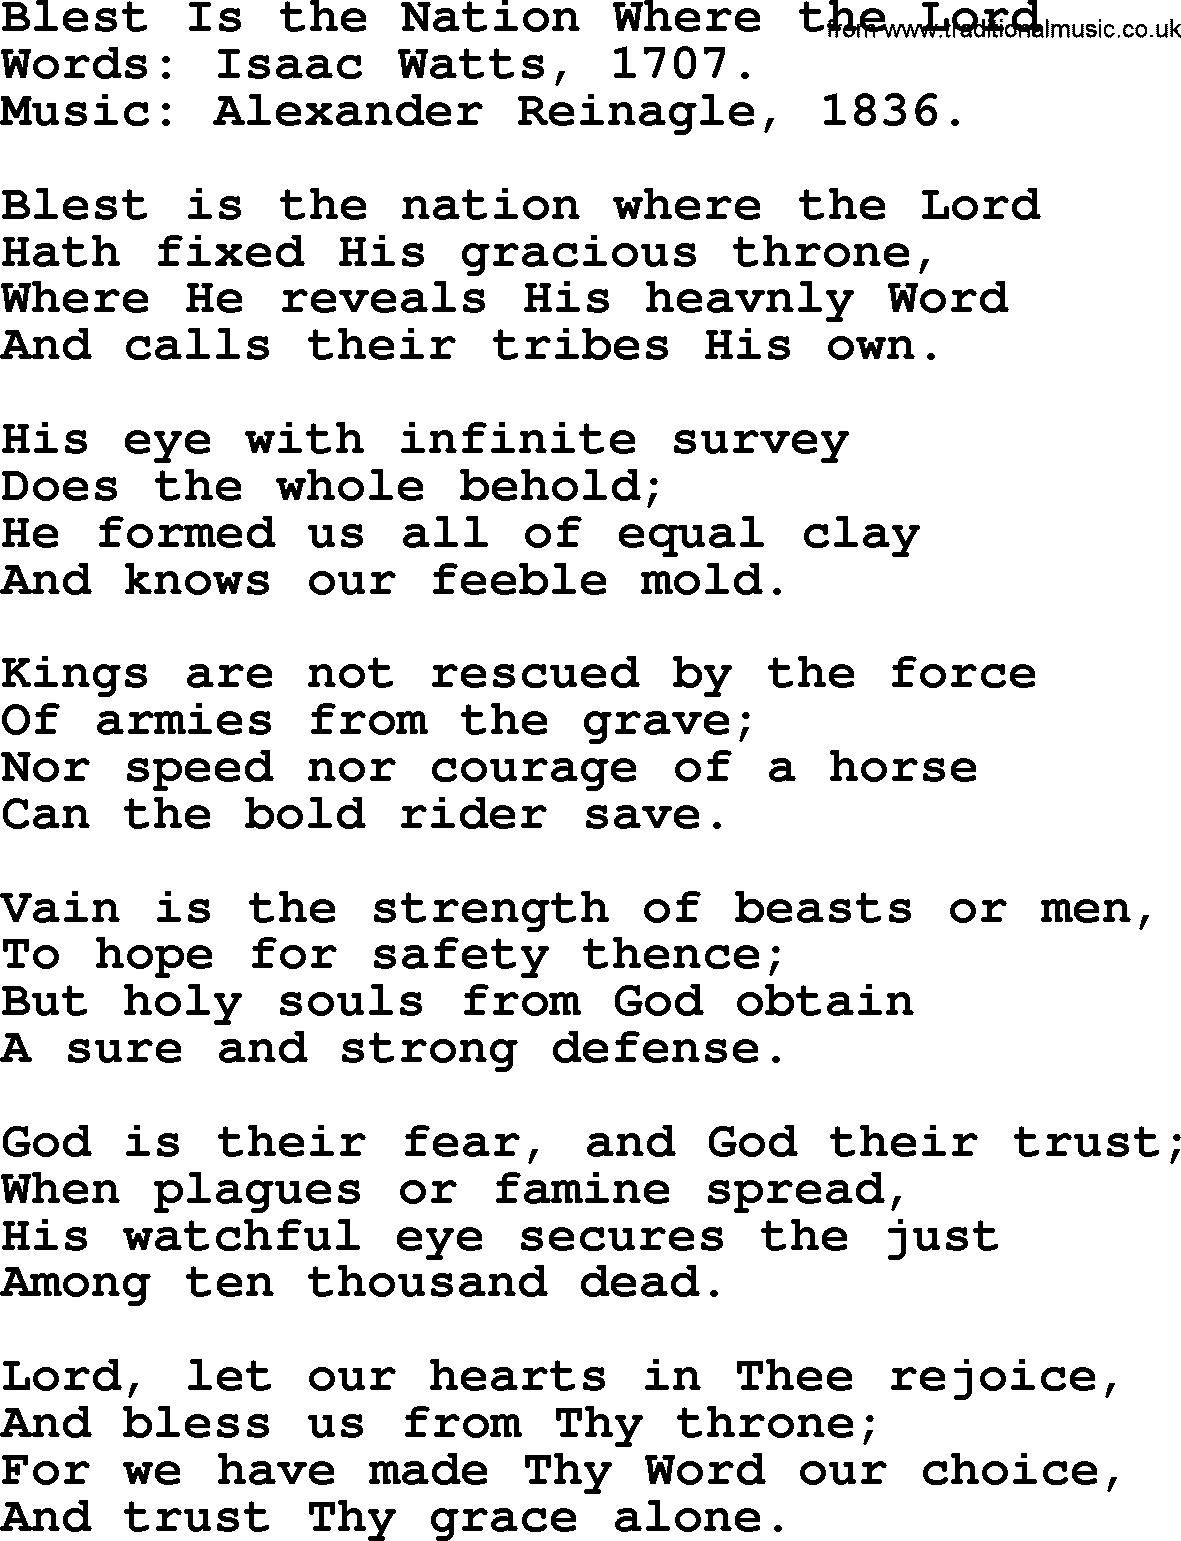 Isaac Watts Christian hymn: Blest Is the Nation Where the Lord- lyricss